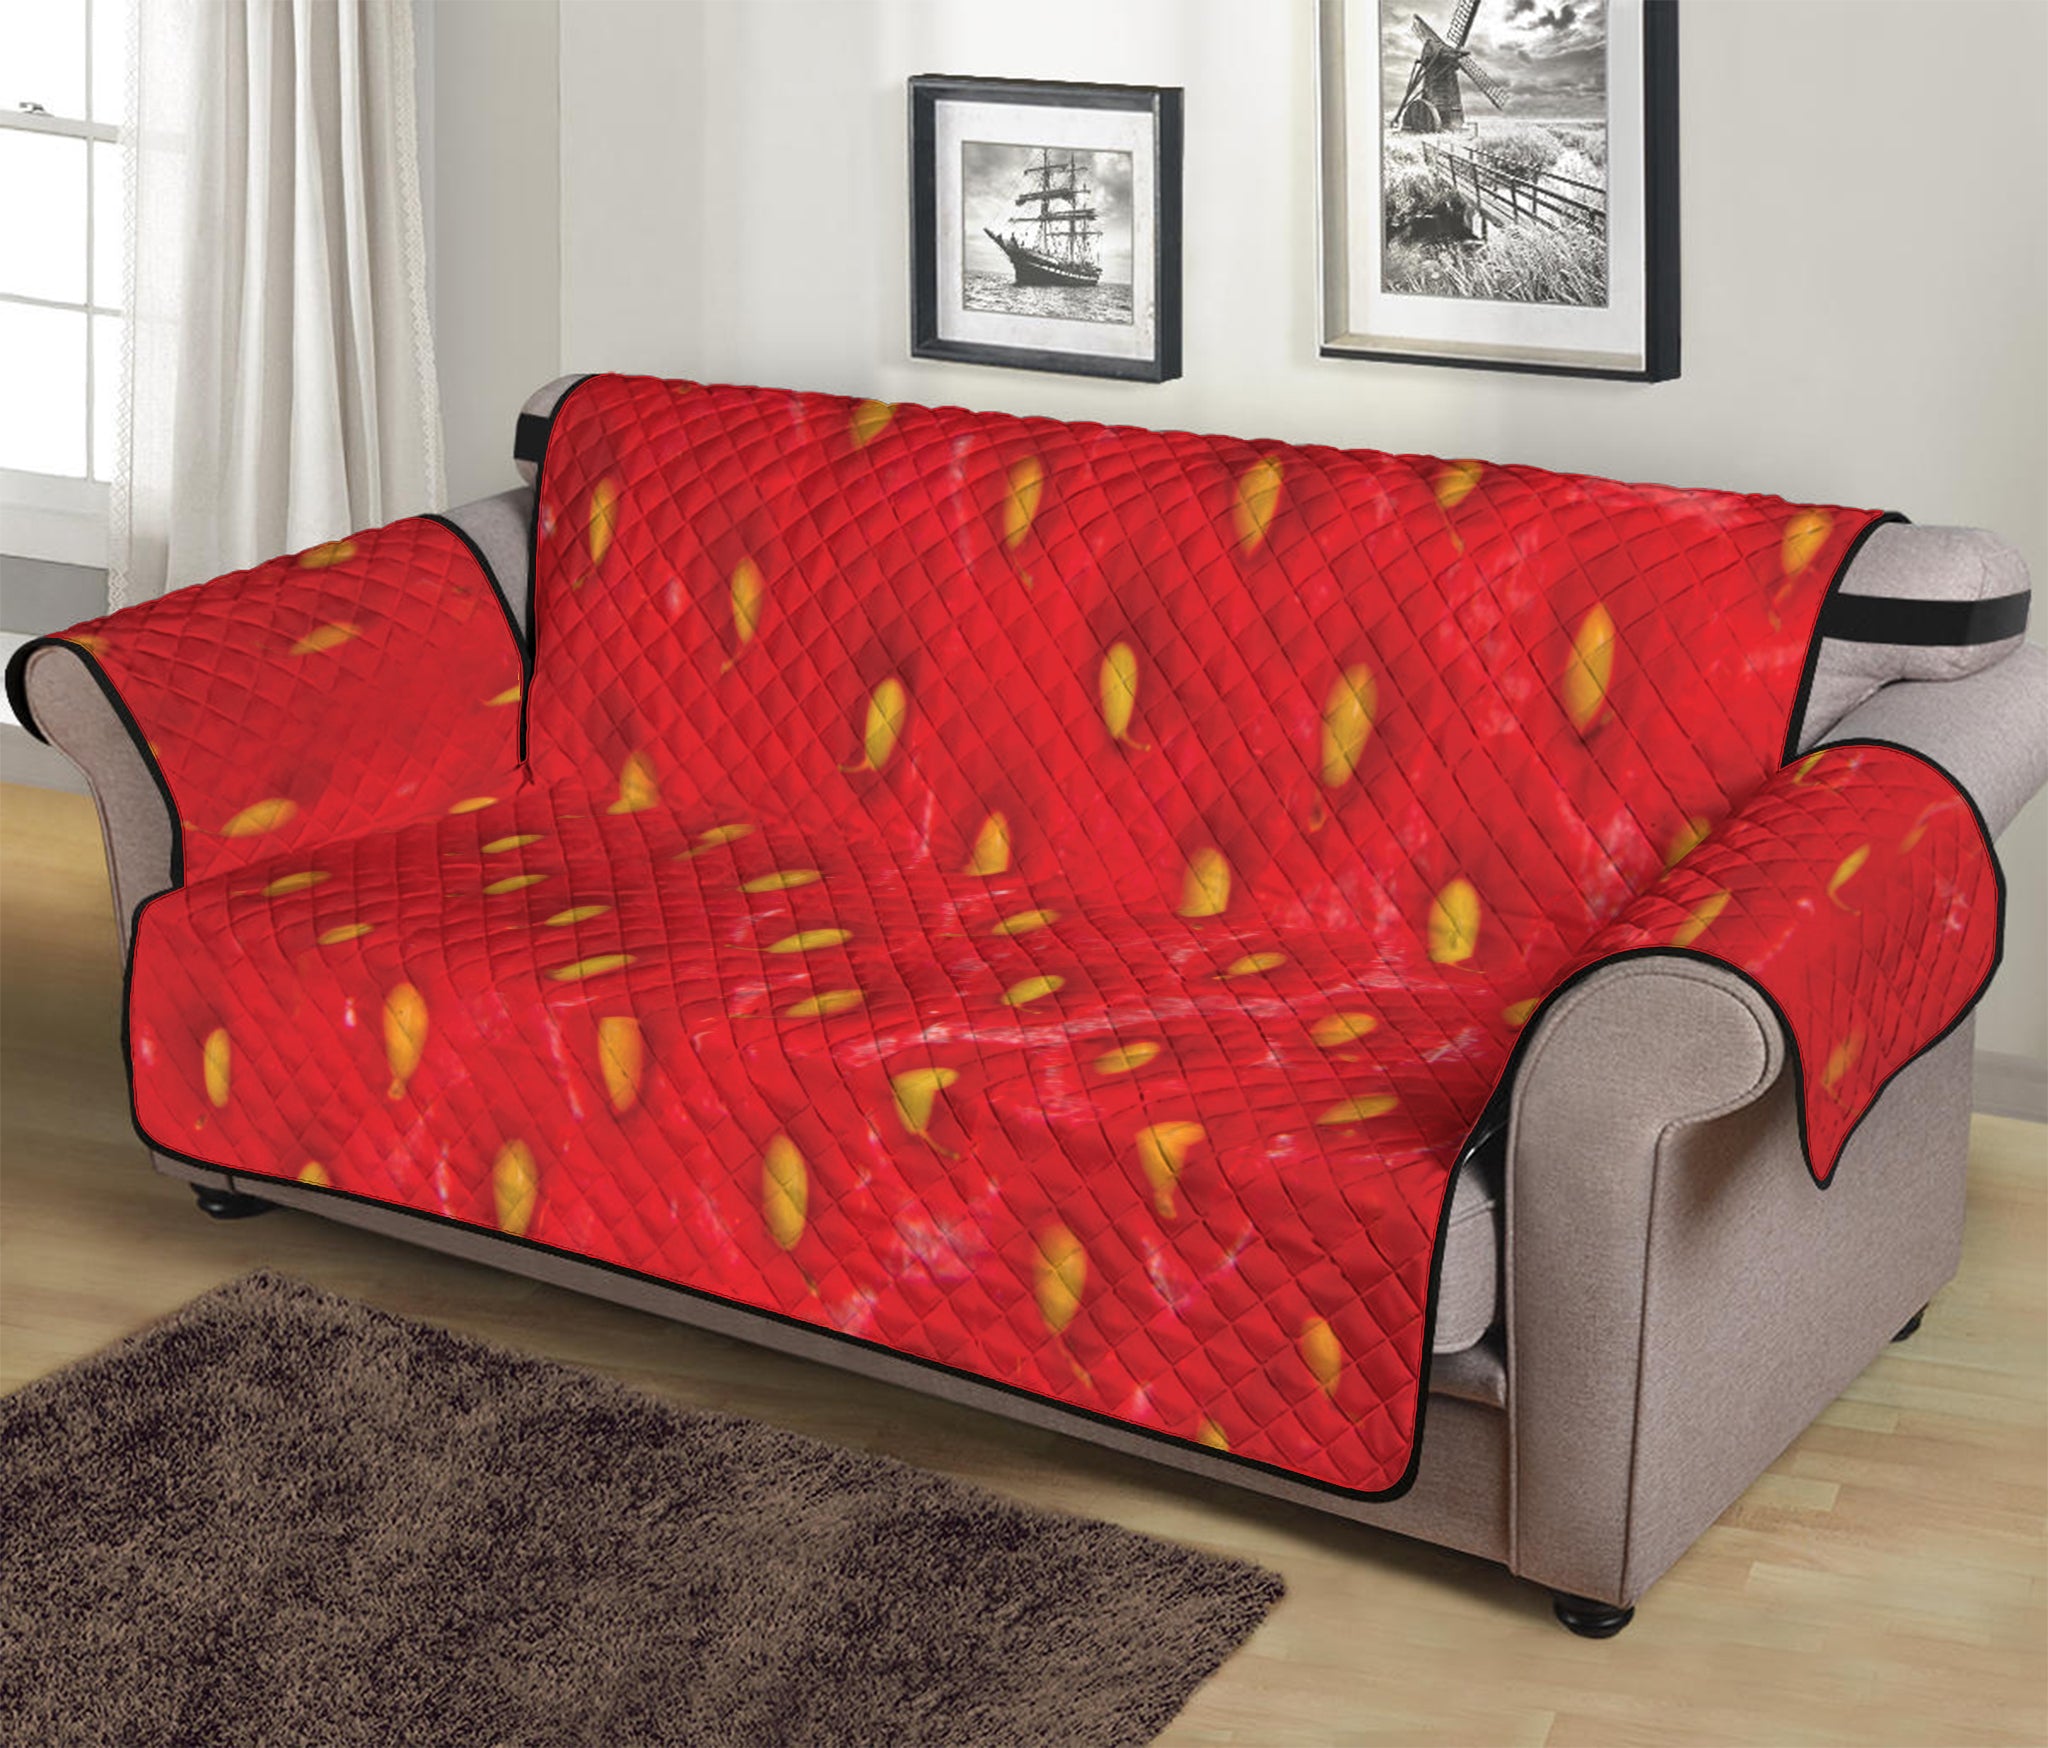 Red Strawberry Print Sofa Protector